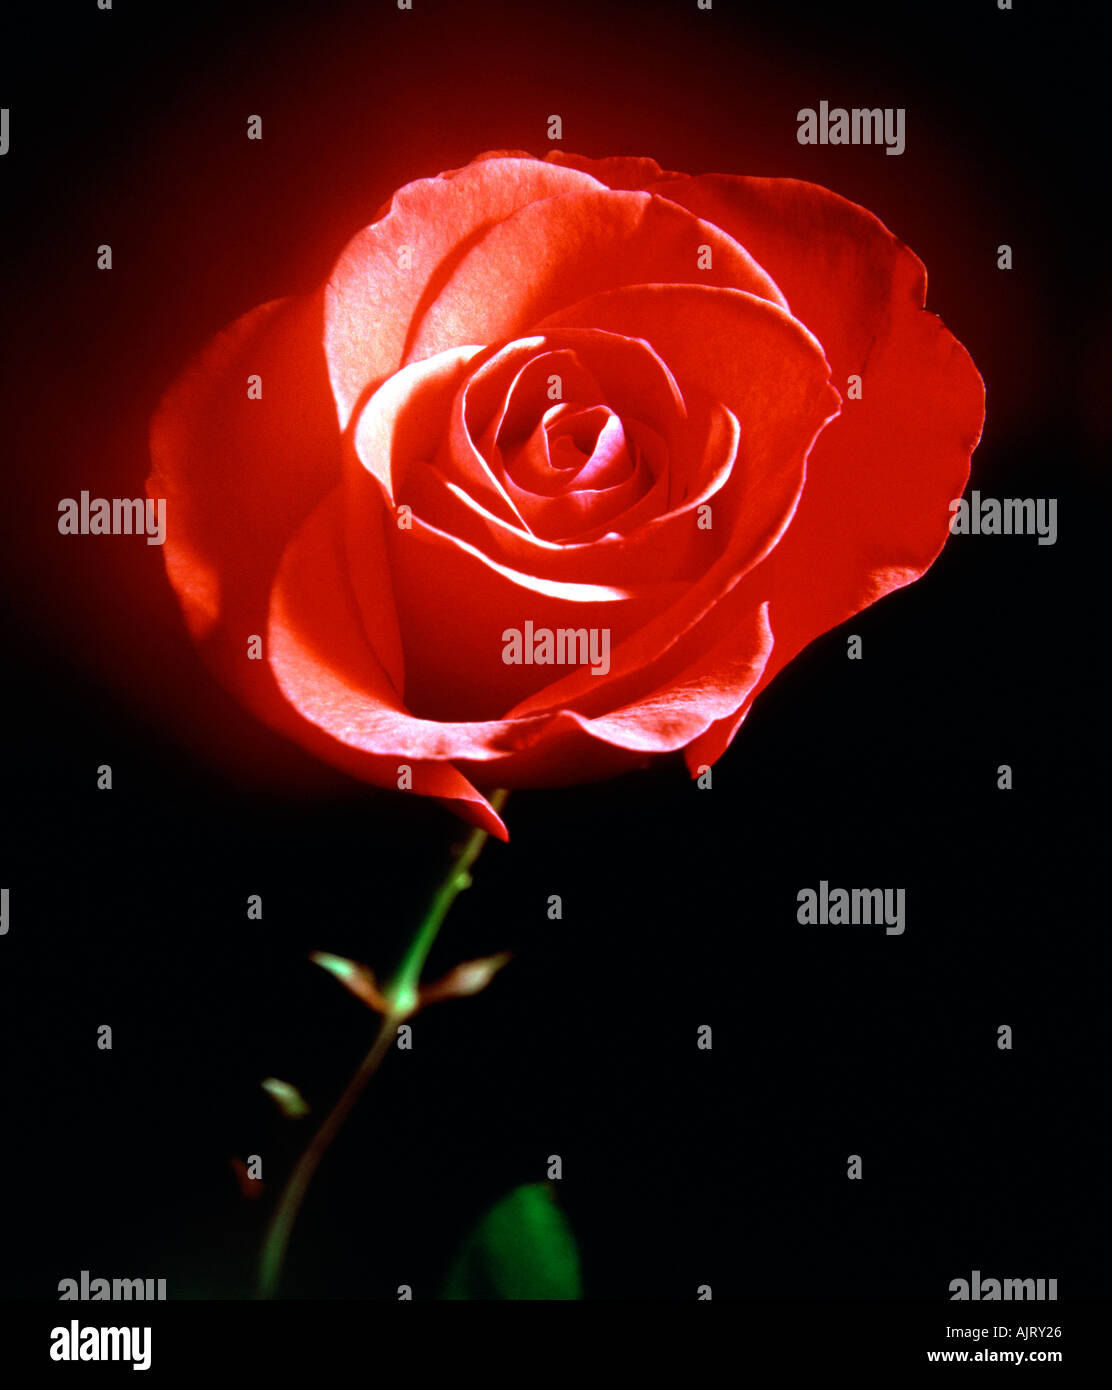 Red Rose. Stock Photo